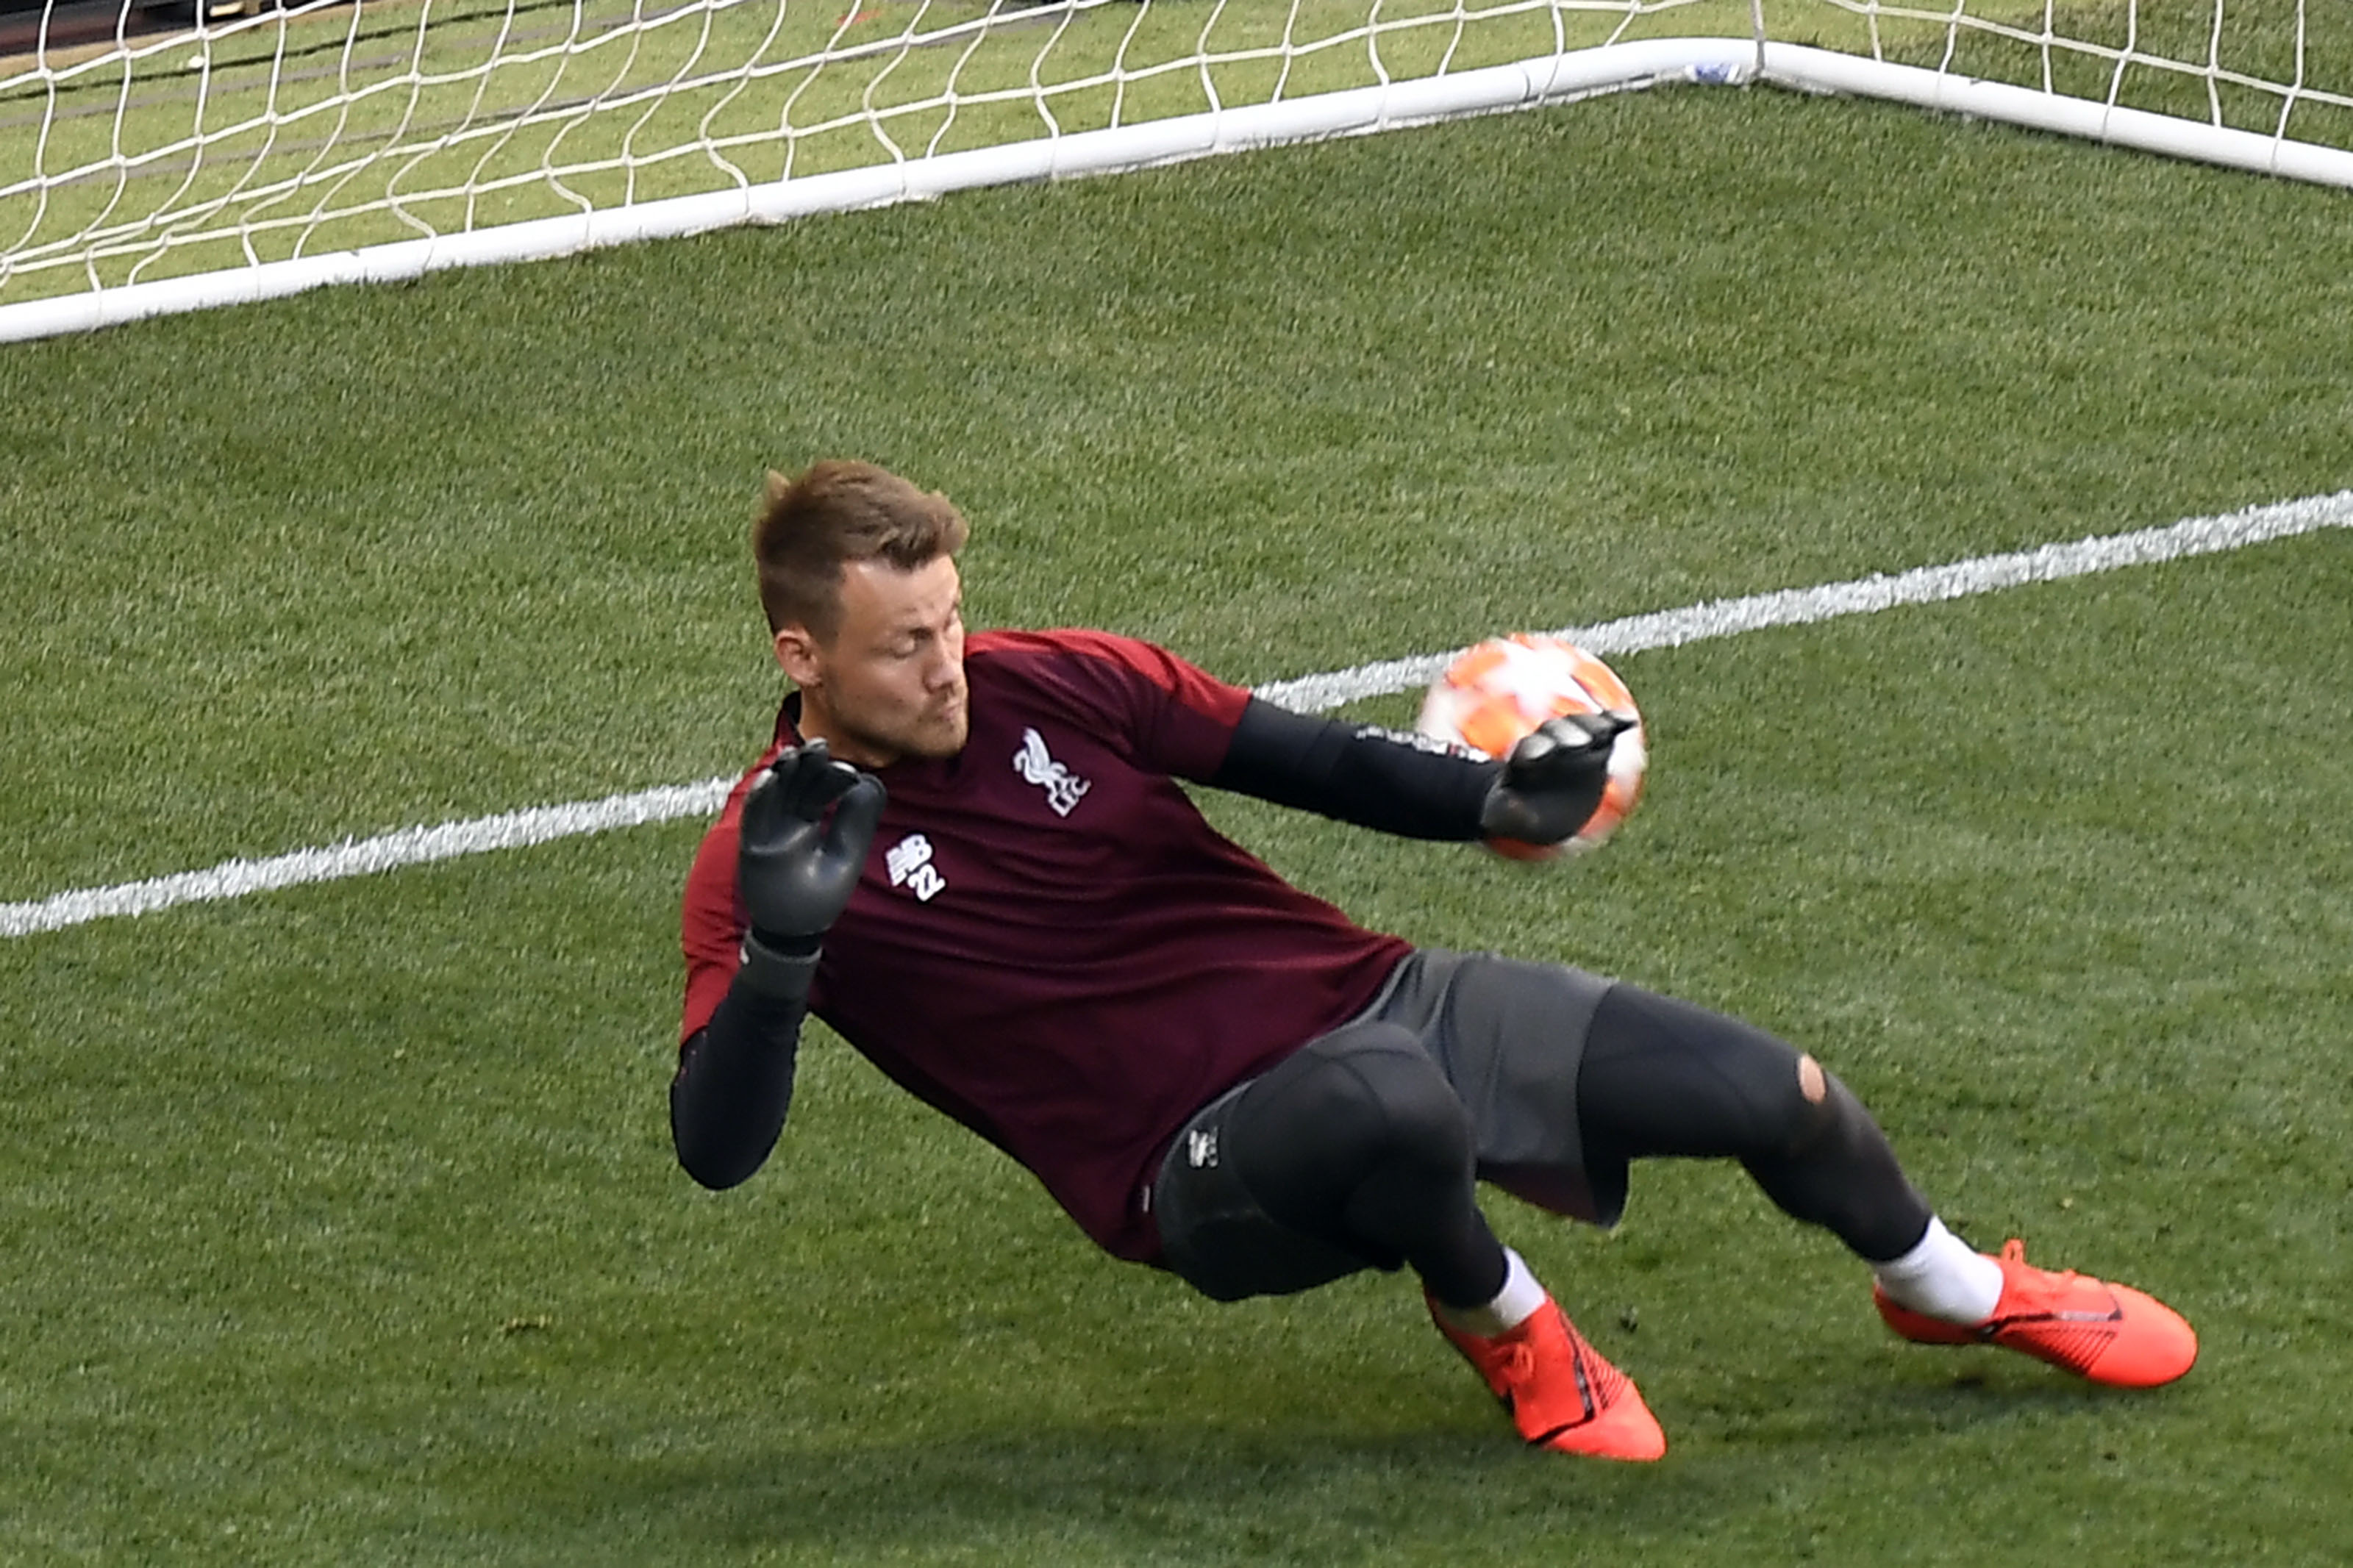 Liverpool's Belgian goalkeeper Simon Mignolet attends a training session at the Wanda Metropolitano Stadium in Madrid on May 31, 2019 on the eve of the UEFA Champions League final football match against Tottenham Hotspur. (Photo by PIERRE-PHILIPPE MARCOU / AFP)        (Photo credit should read PIERRE-PHILIPPE MARCOU/AFP/Getty Images)